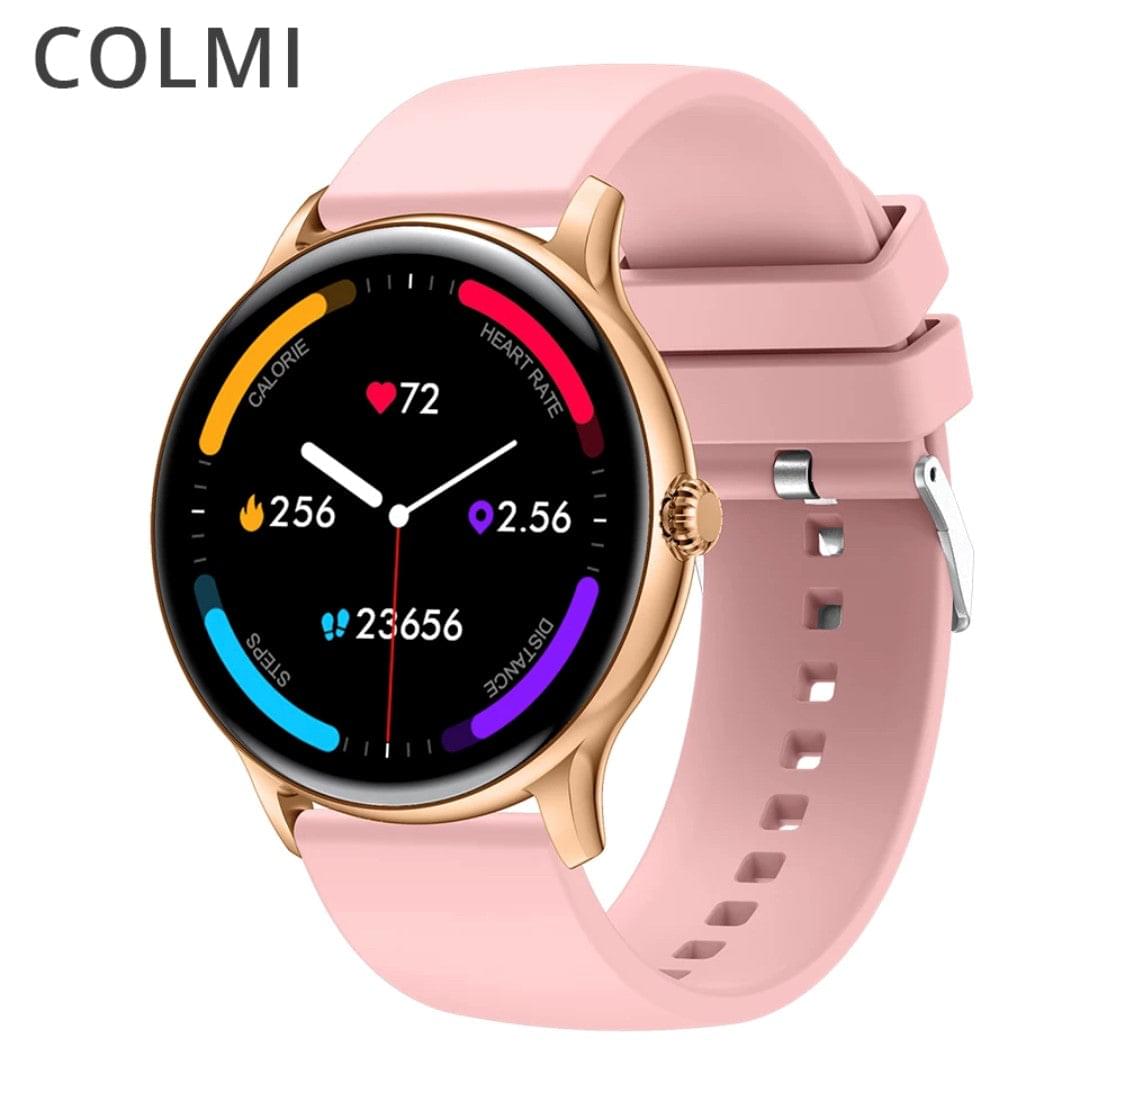 Stay Connected with Colmi i10 Black Smartwatch - Smart Watch South Africa